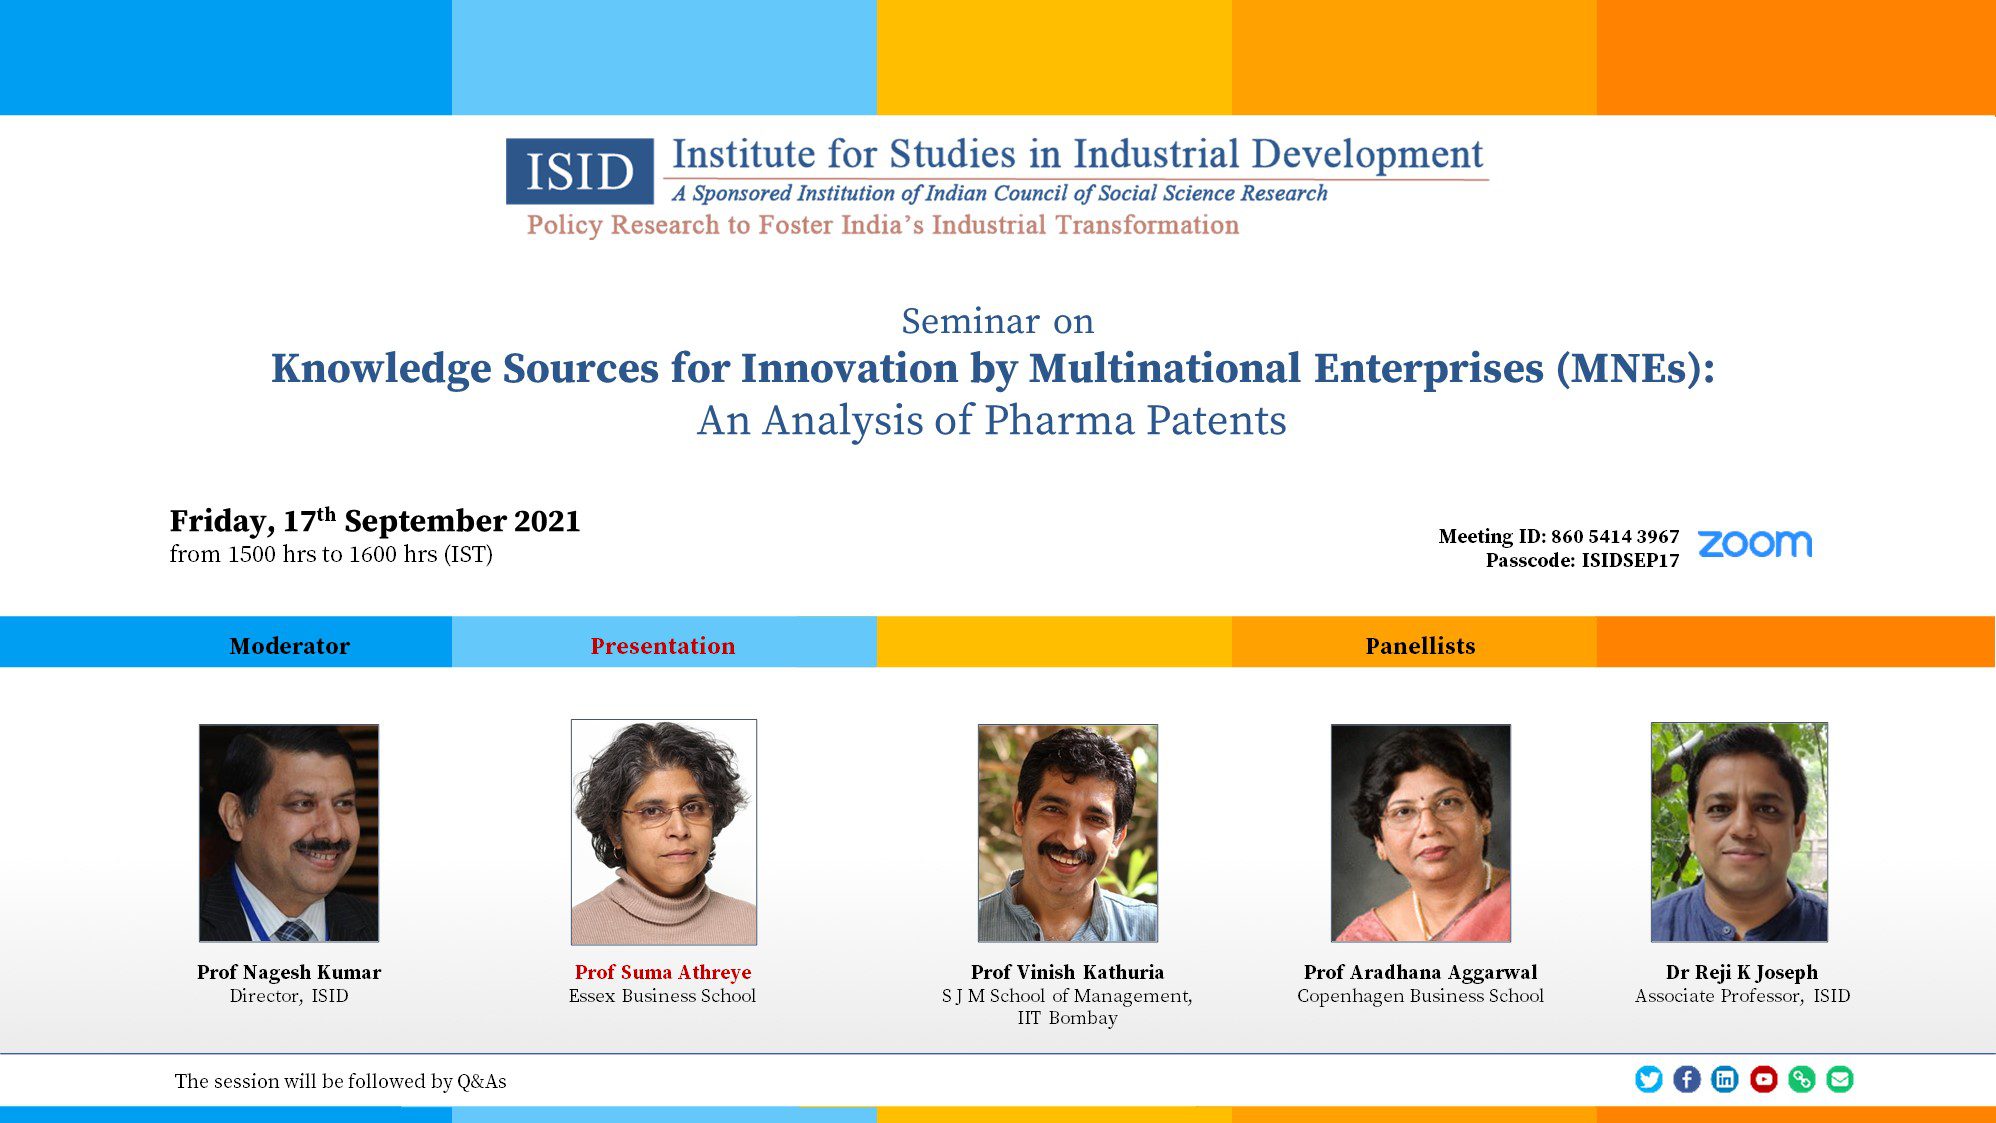 Knowledge Sources for Innovation by Multinational Enterprises (MNEs)